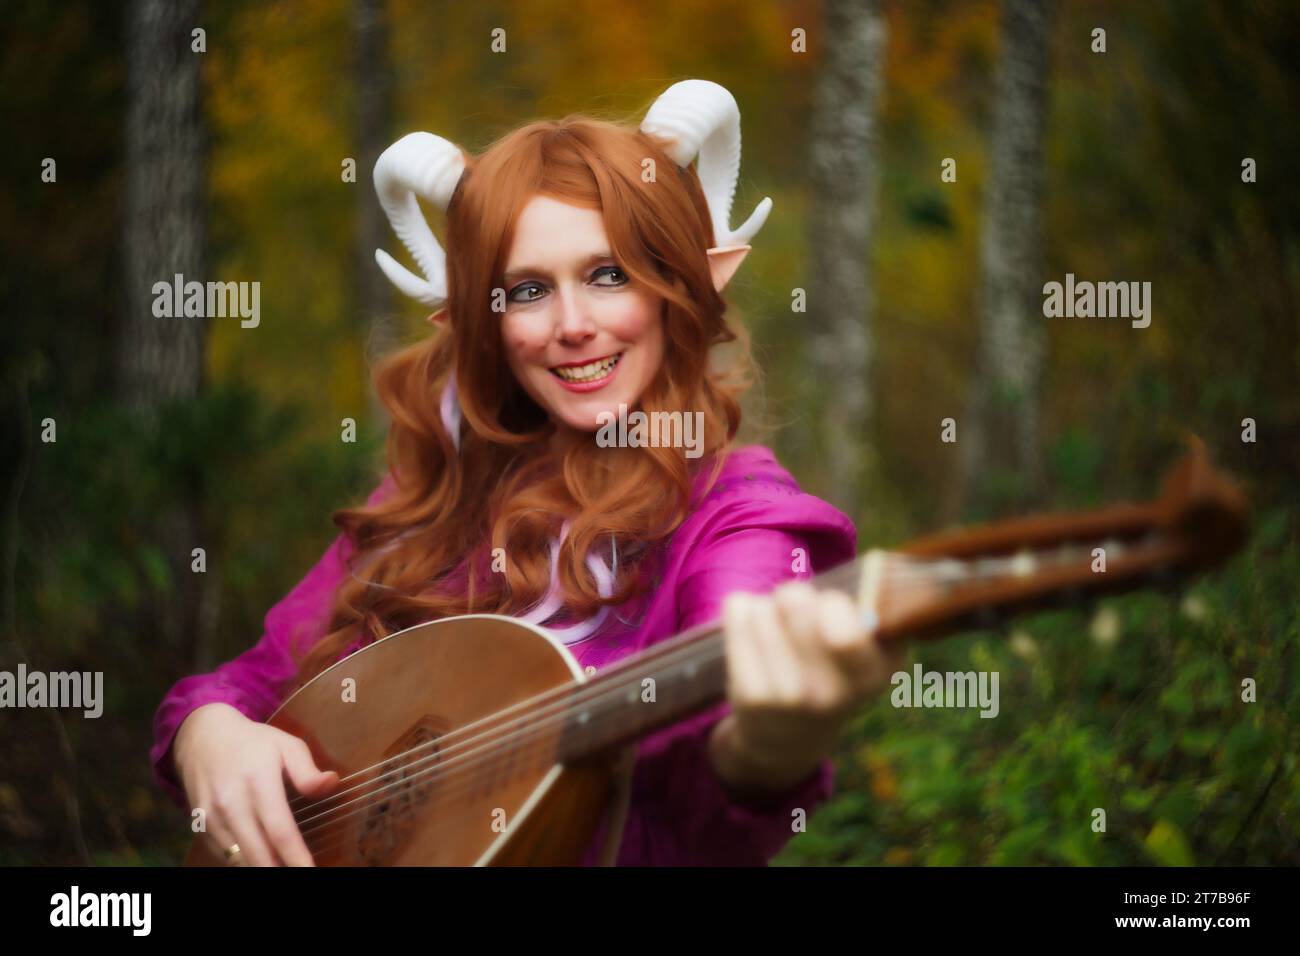 A whimsical moment featuring a female Tiefling from Dungeons & Dragons, laughing mischievously with a sly glance to the side. Posed playfully with a l Stock Photo